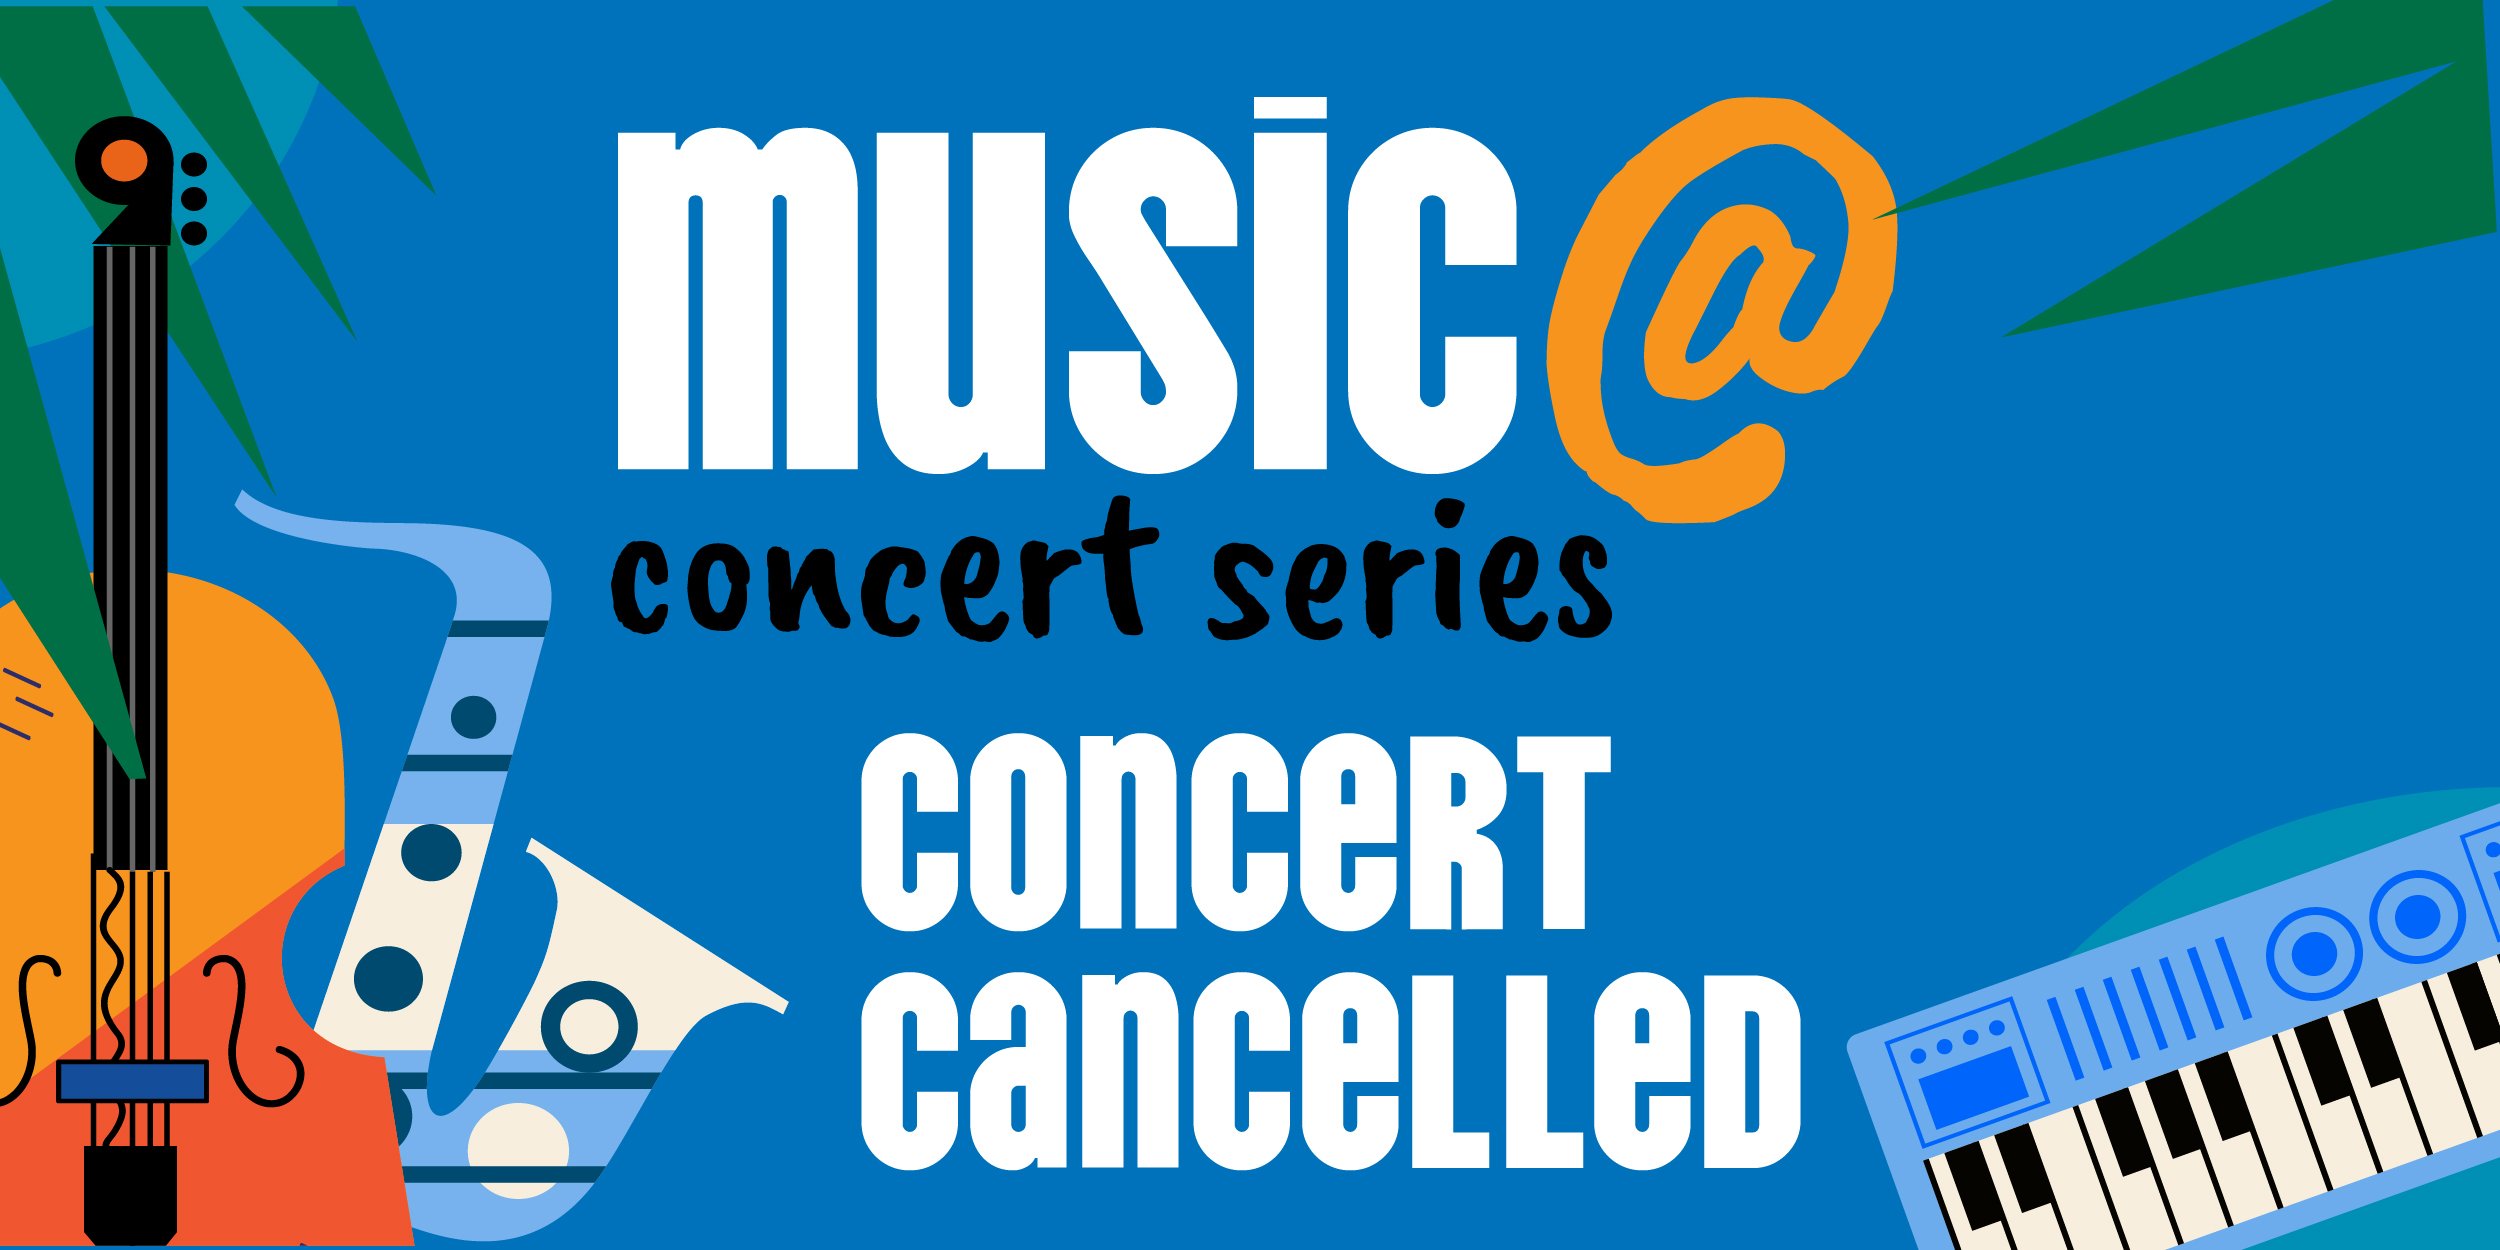 A graphic with text that says "Music @ Concert Series Concert Cancelled"